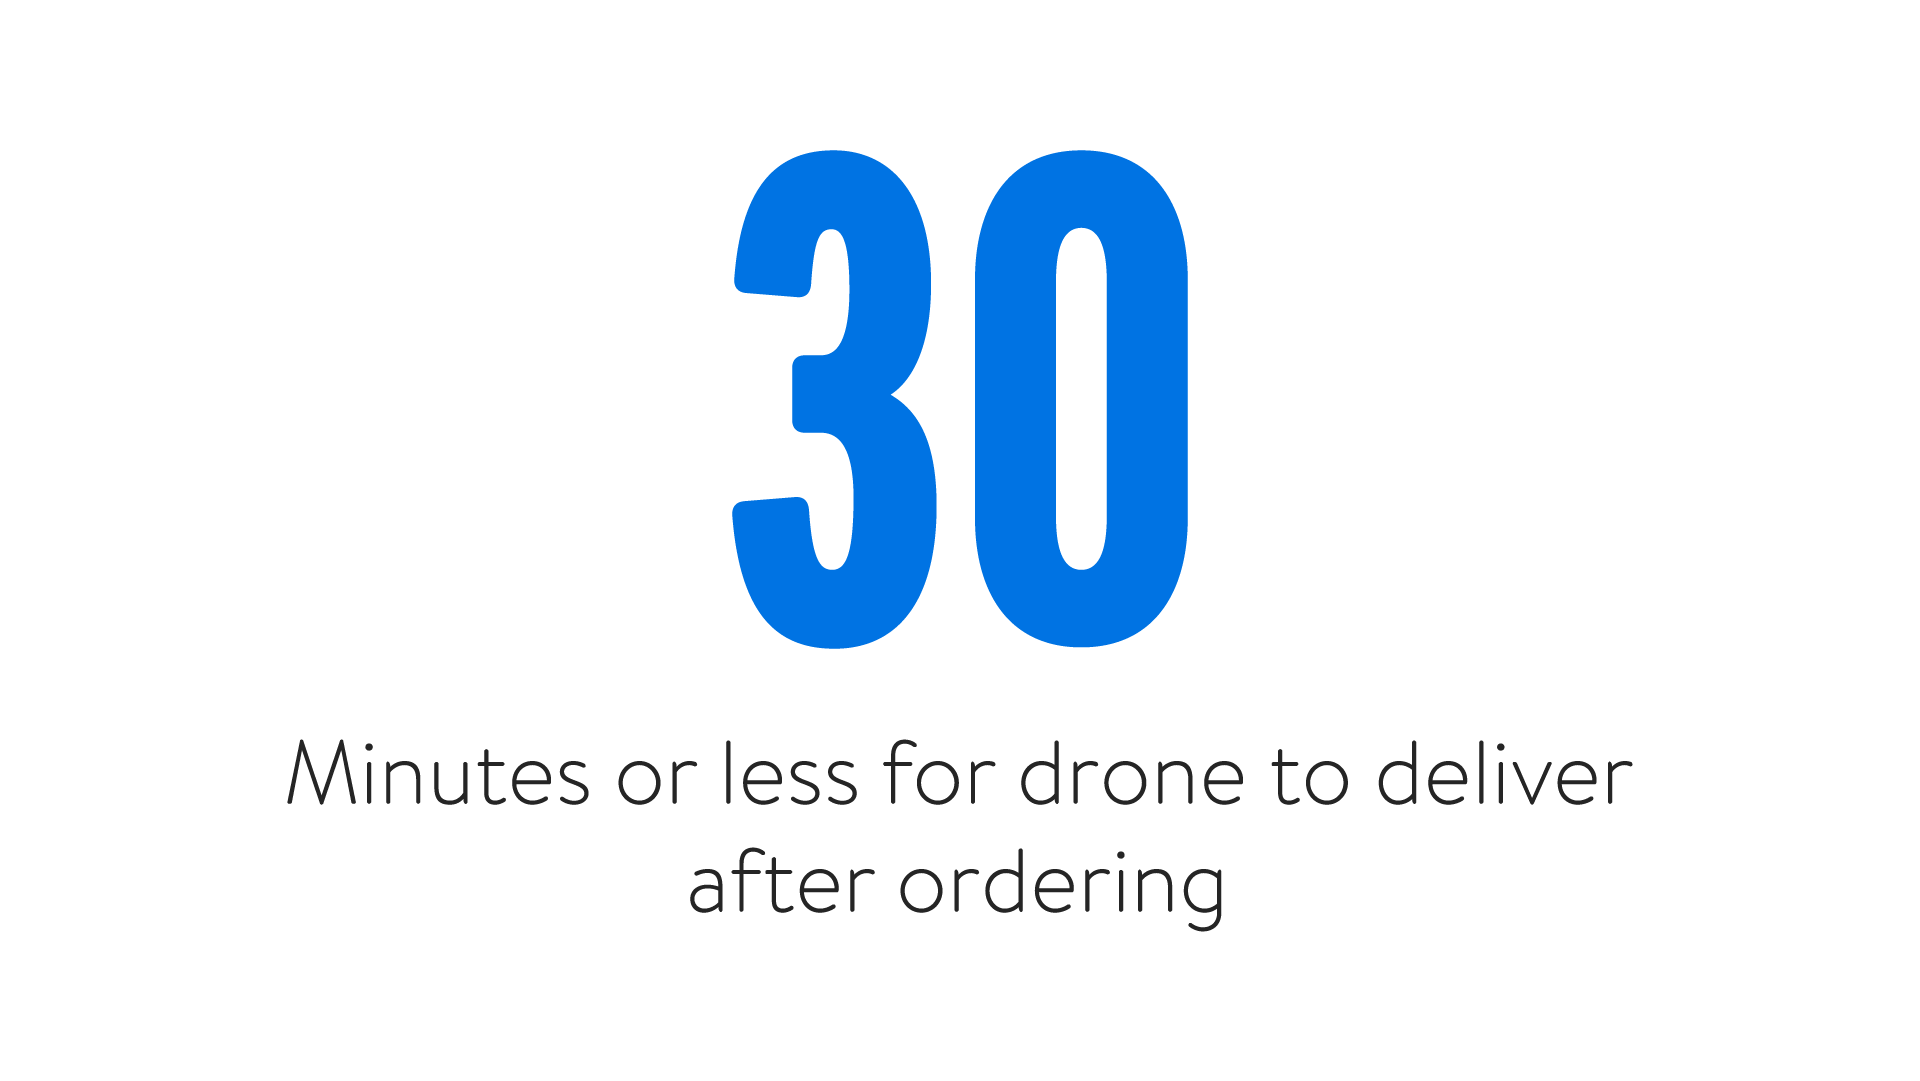 30 Minutes or less for drone to deliver after ordering